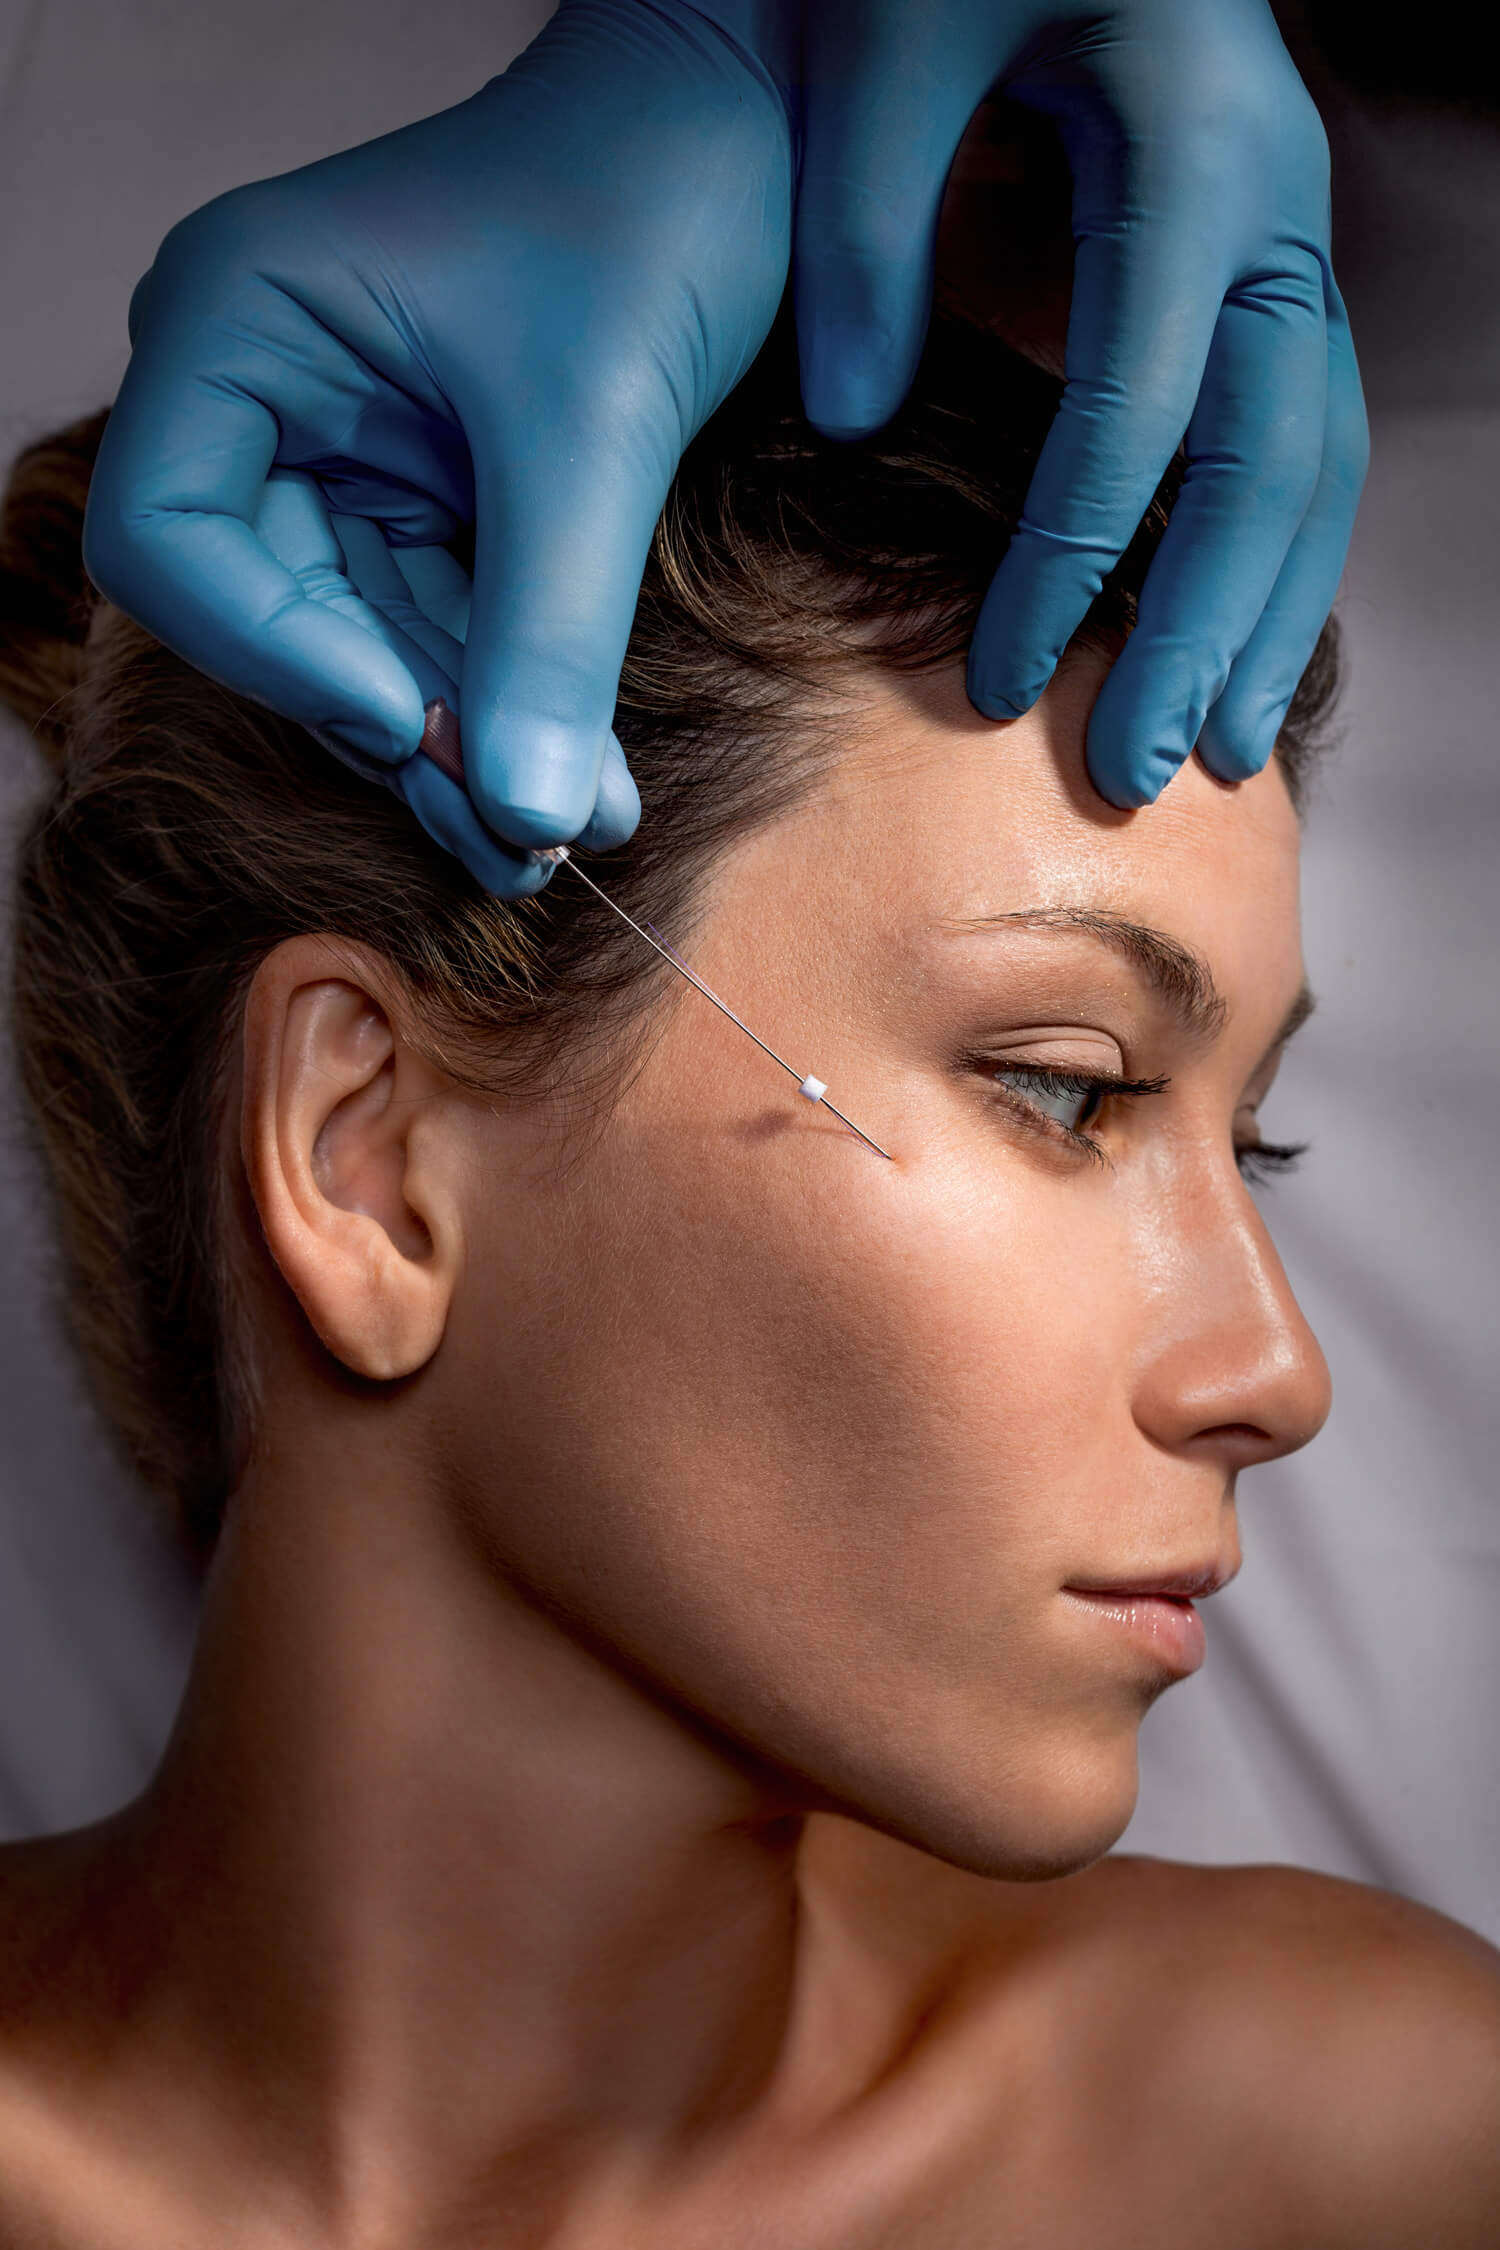 The thread lift is a non-surgical treatment loved by Gwyneth Paltrow – so how does it work? Photo: Source Rejuvenation MedSpa